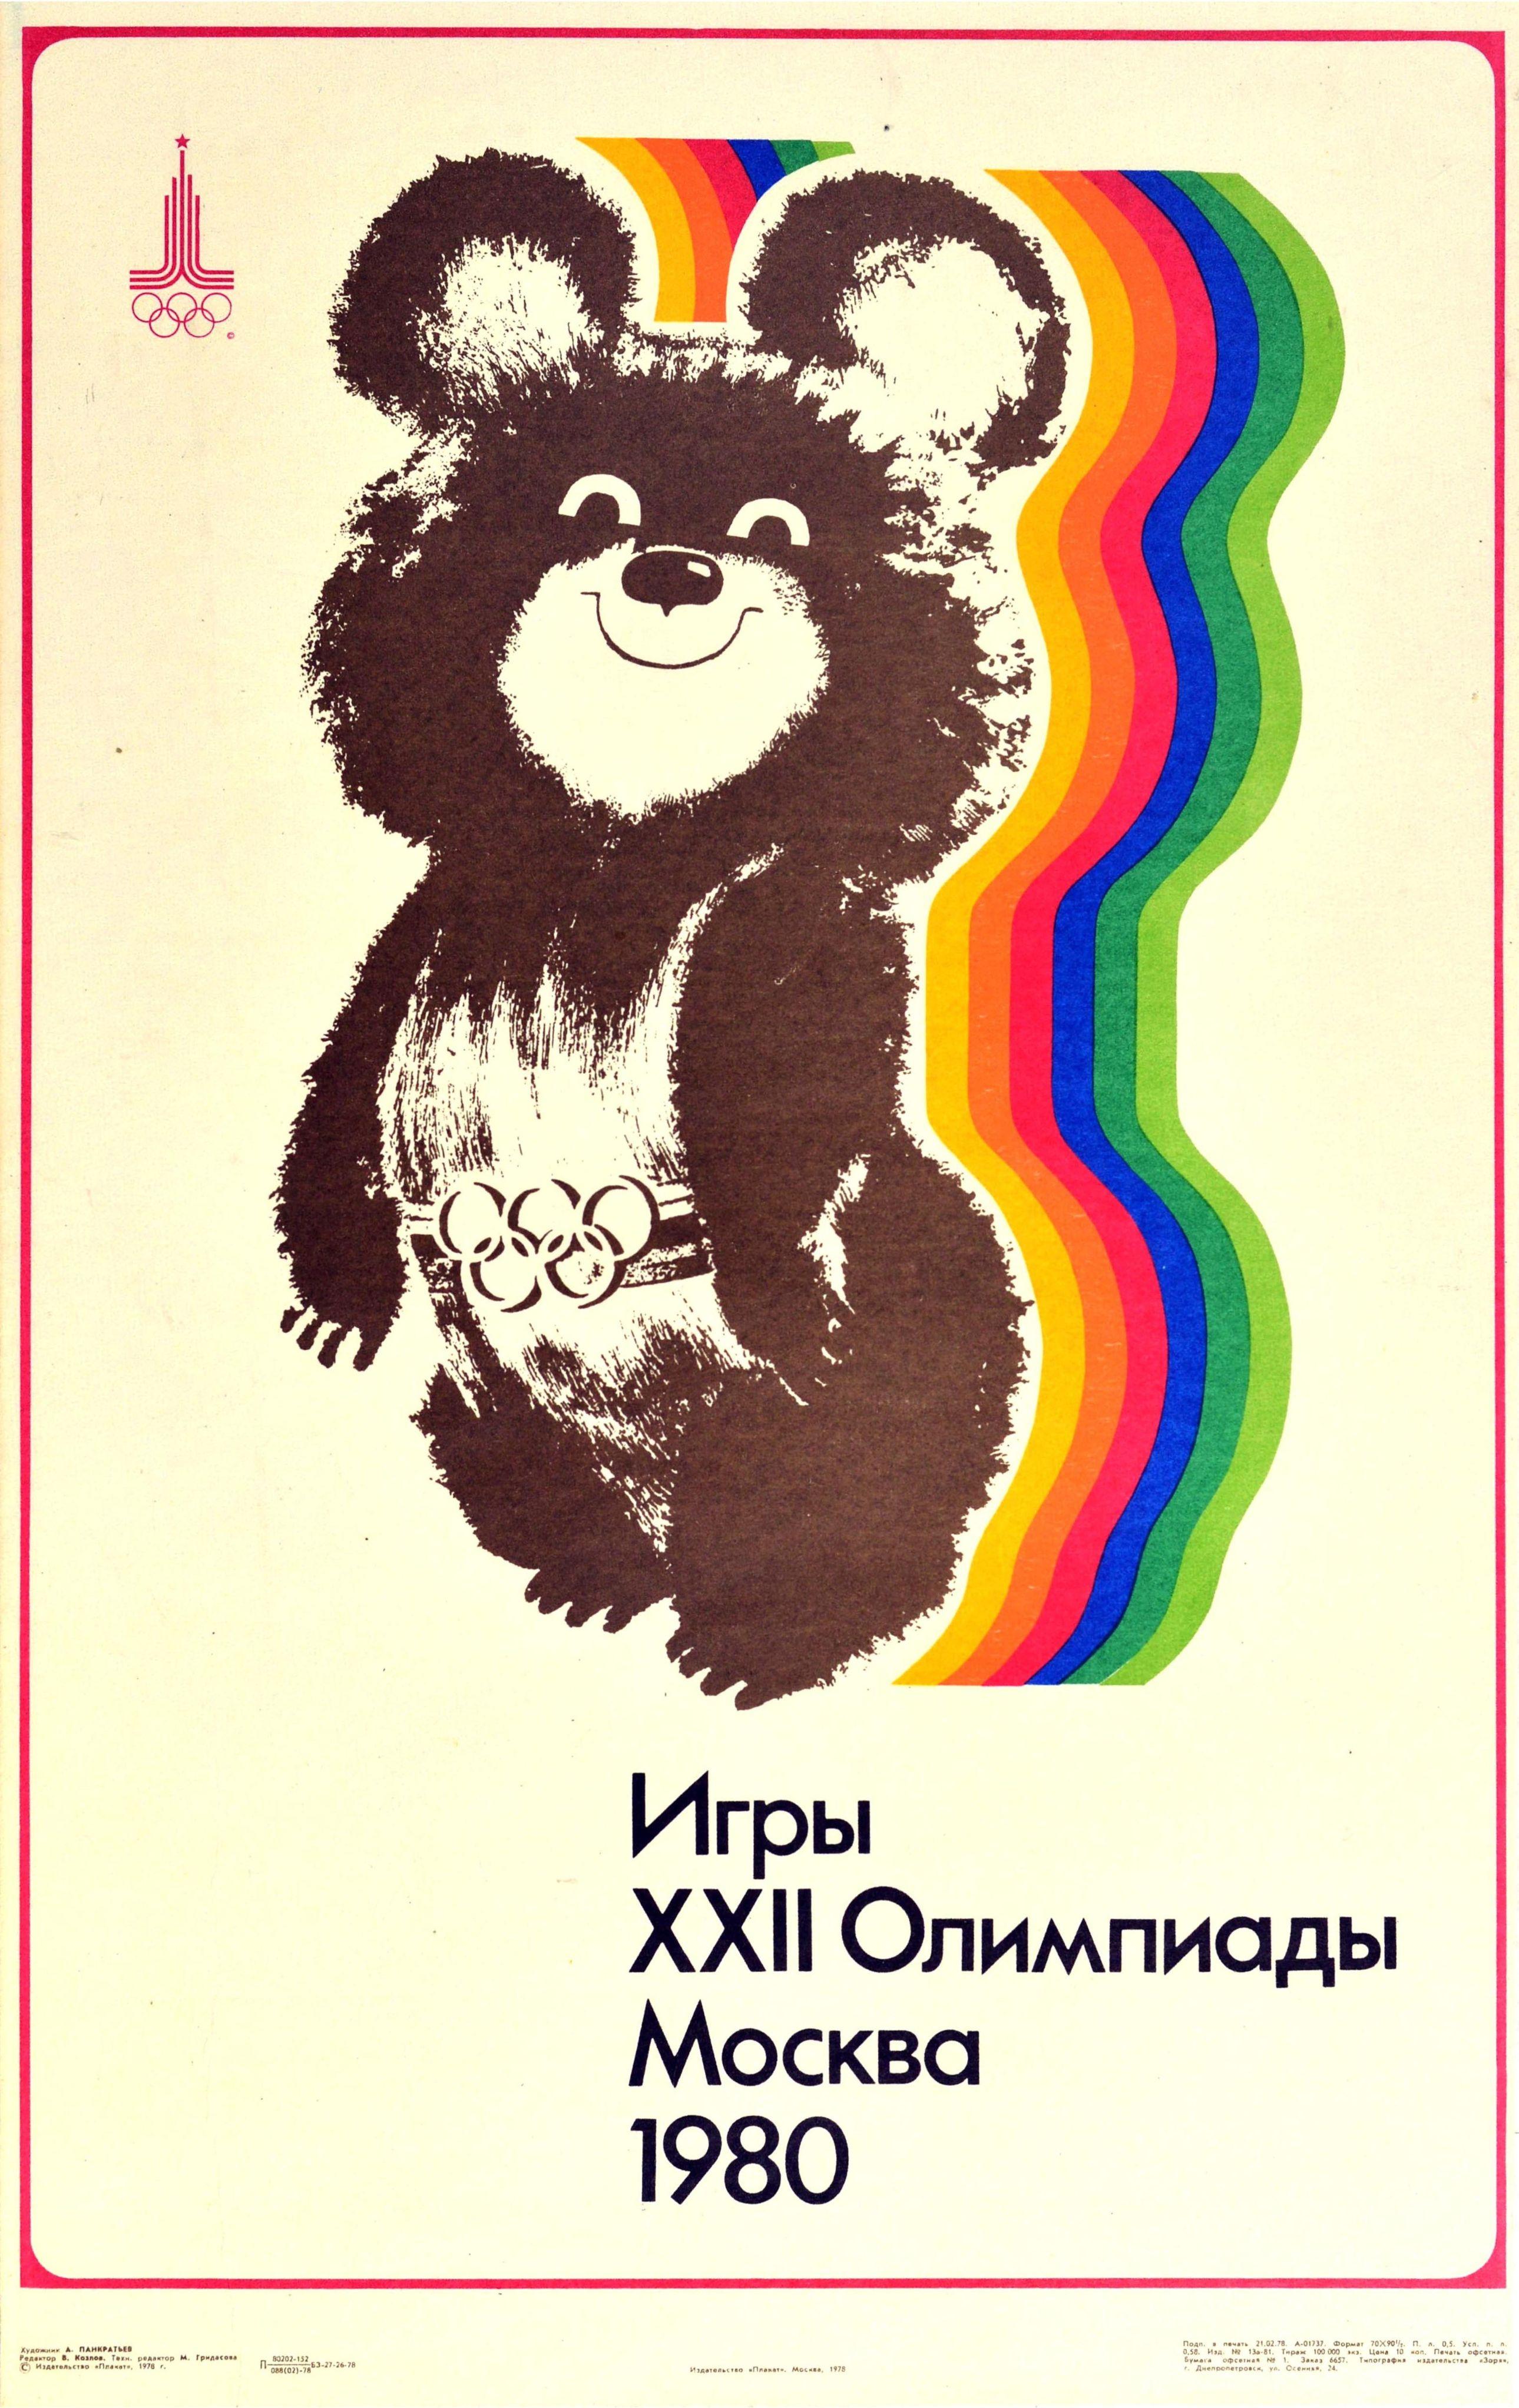 Original vintage Soviet sports poster for the 22nd Summer Olympic Games / Games of the XXII Olympiad held in Moscow Russia in 1980 featuring a fun and colourful illustration of a smiling bear - Misha the Moscow Olympic Games mascot (designed by the